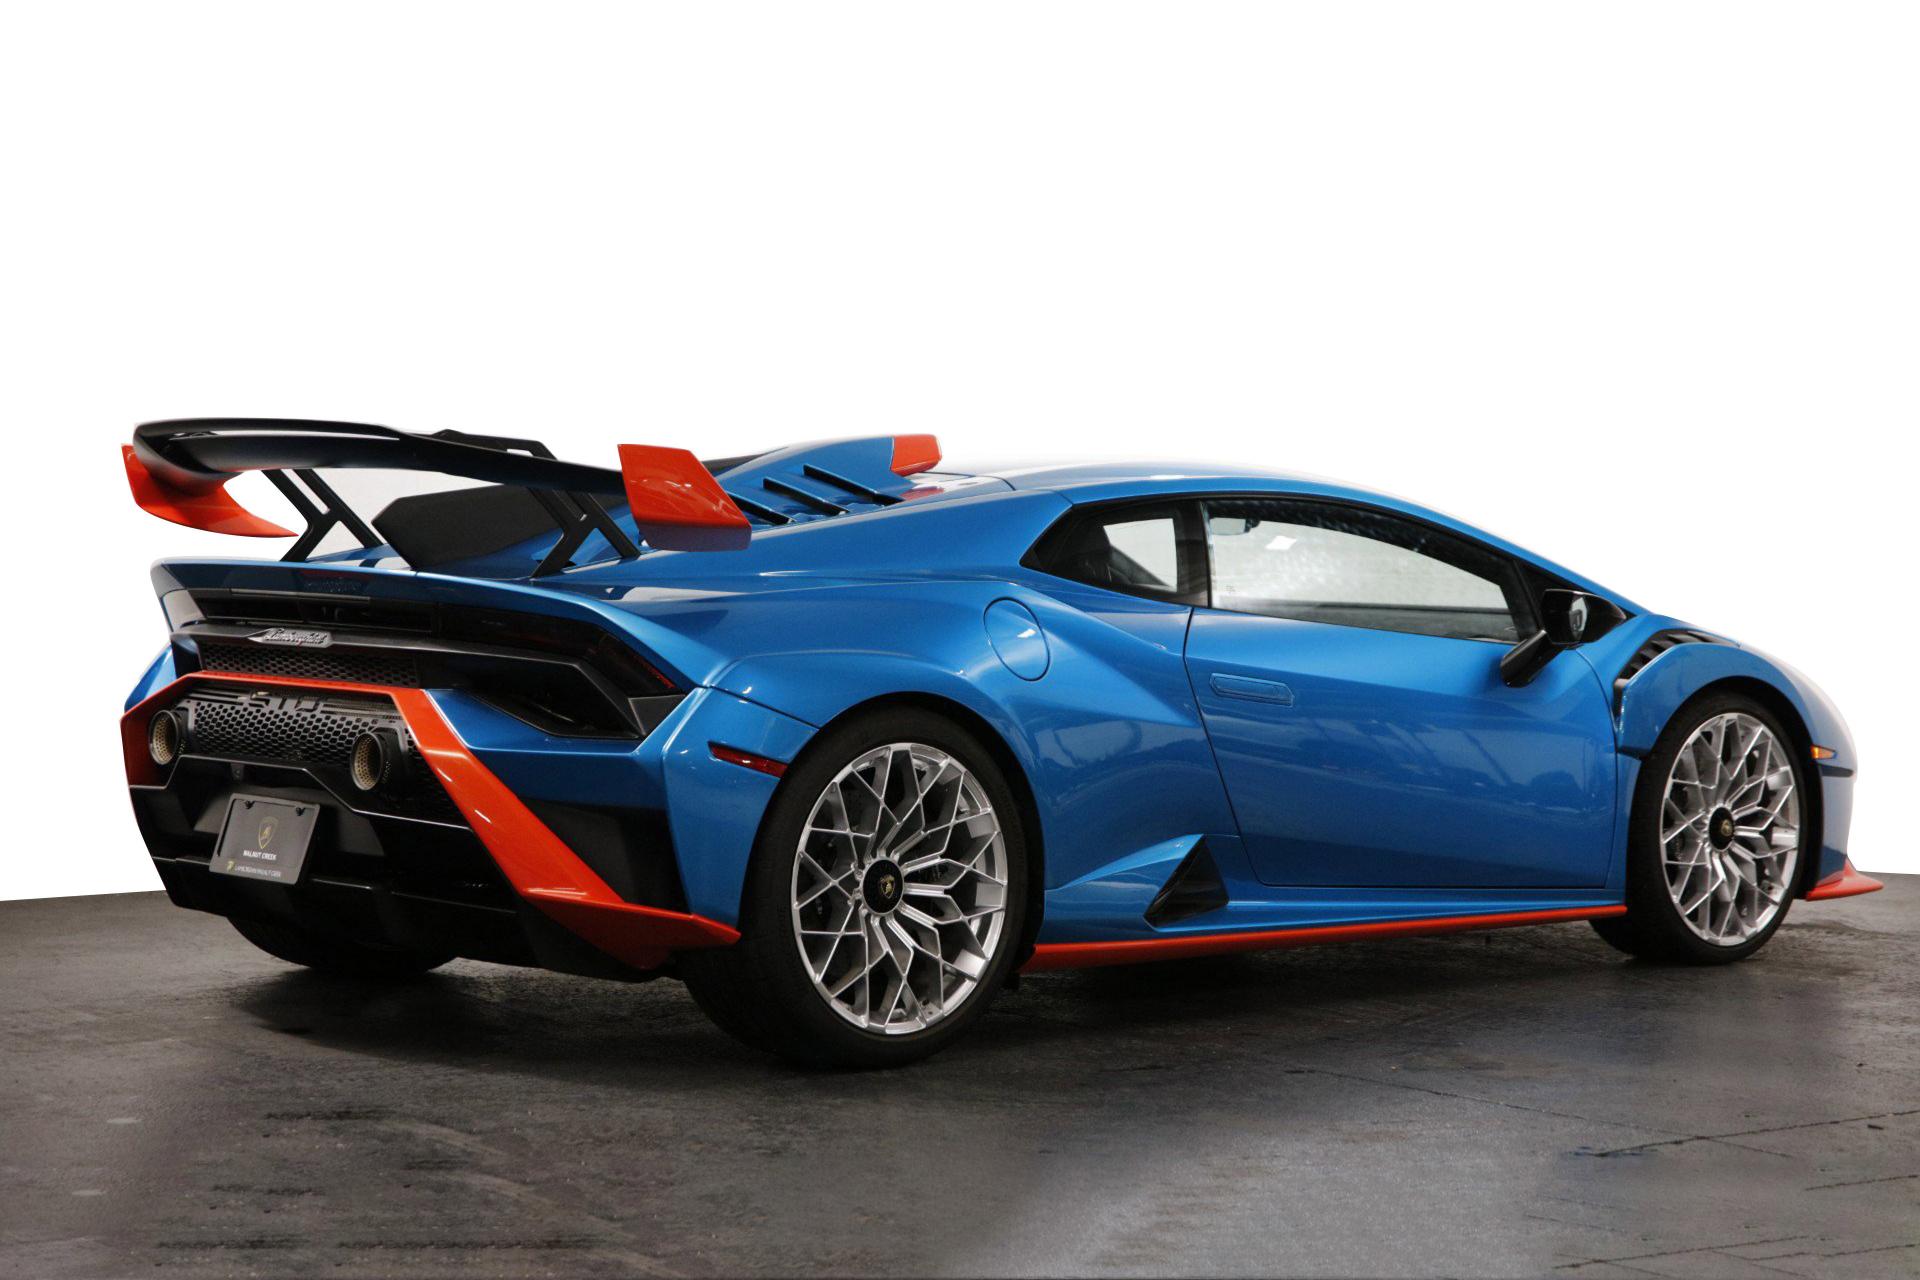 Lamborghini Huracan STO: Now in pictures - CarWale